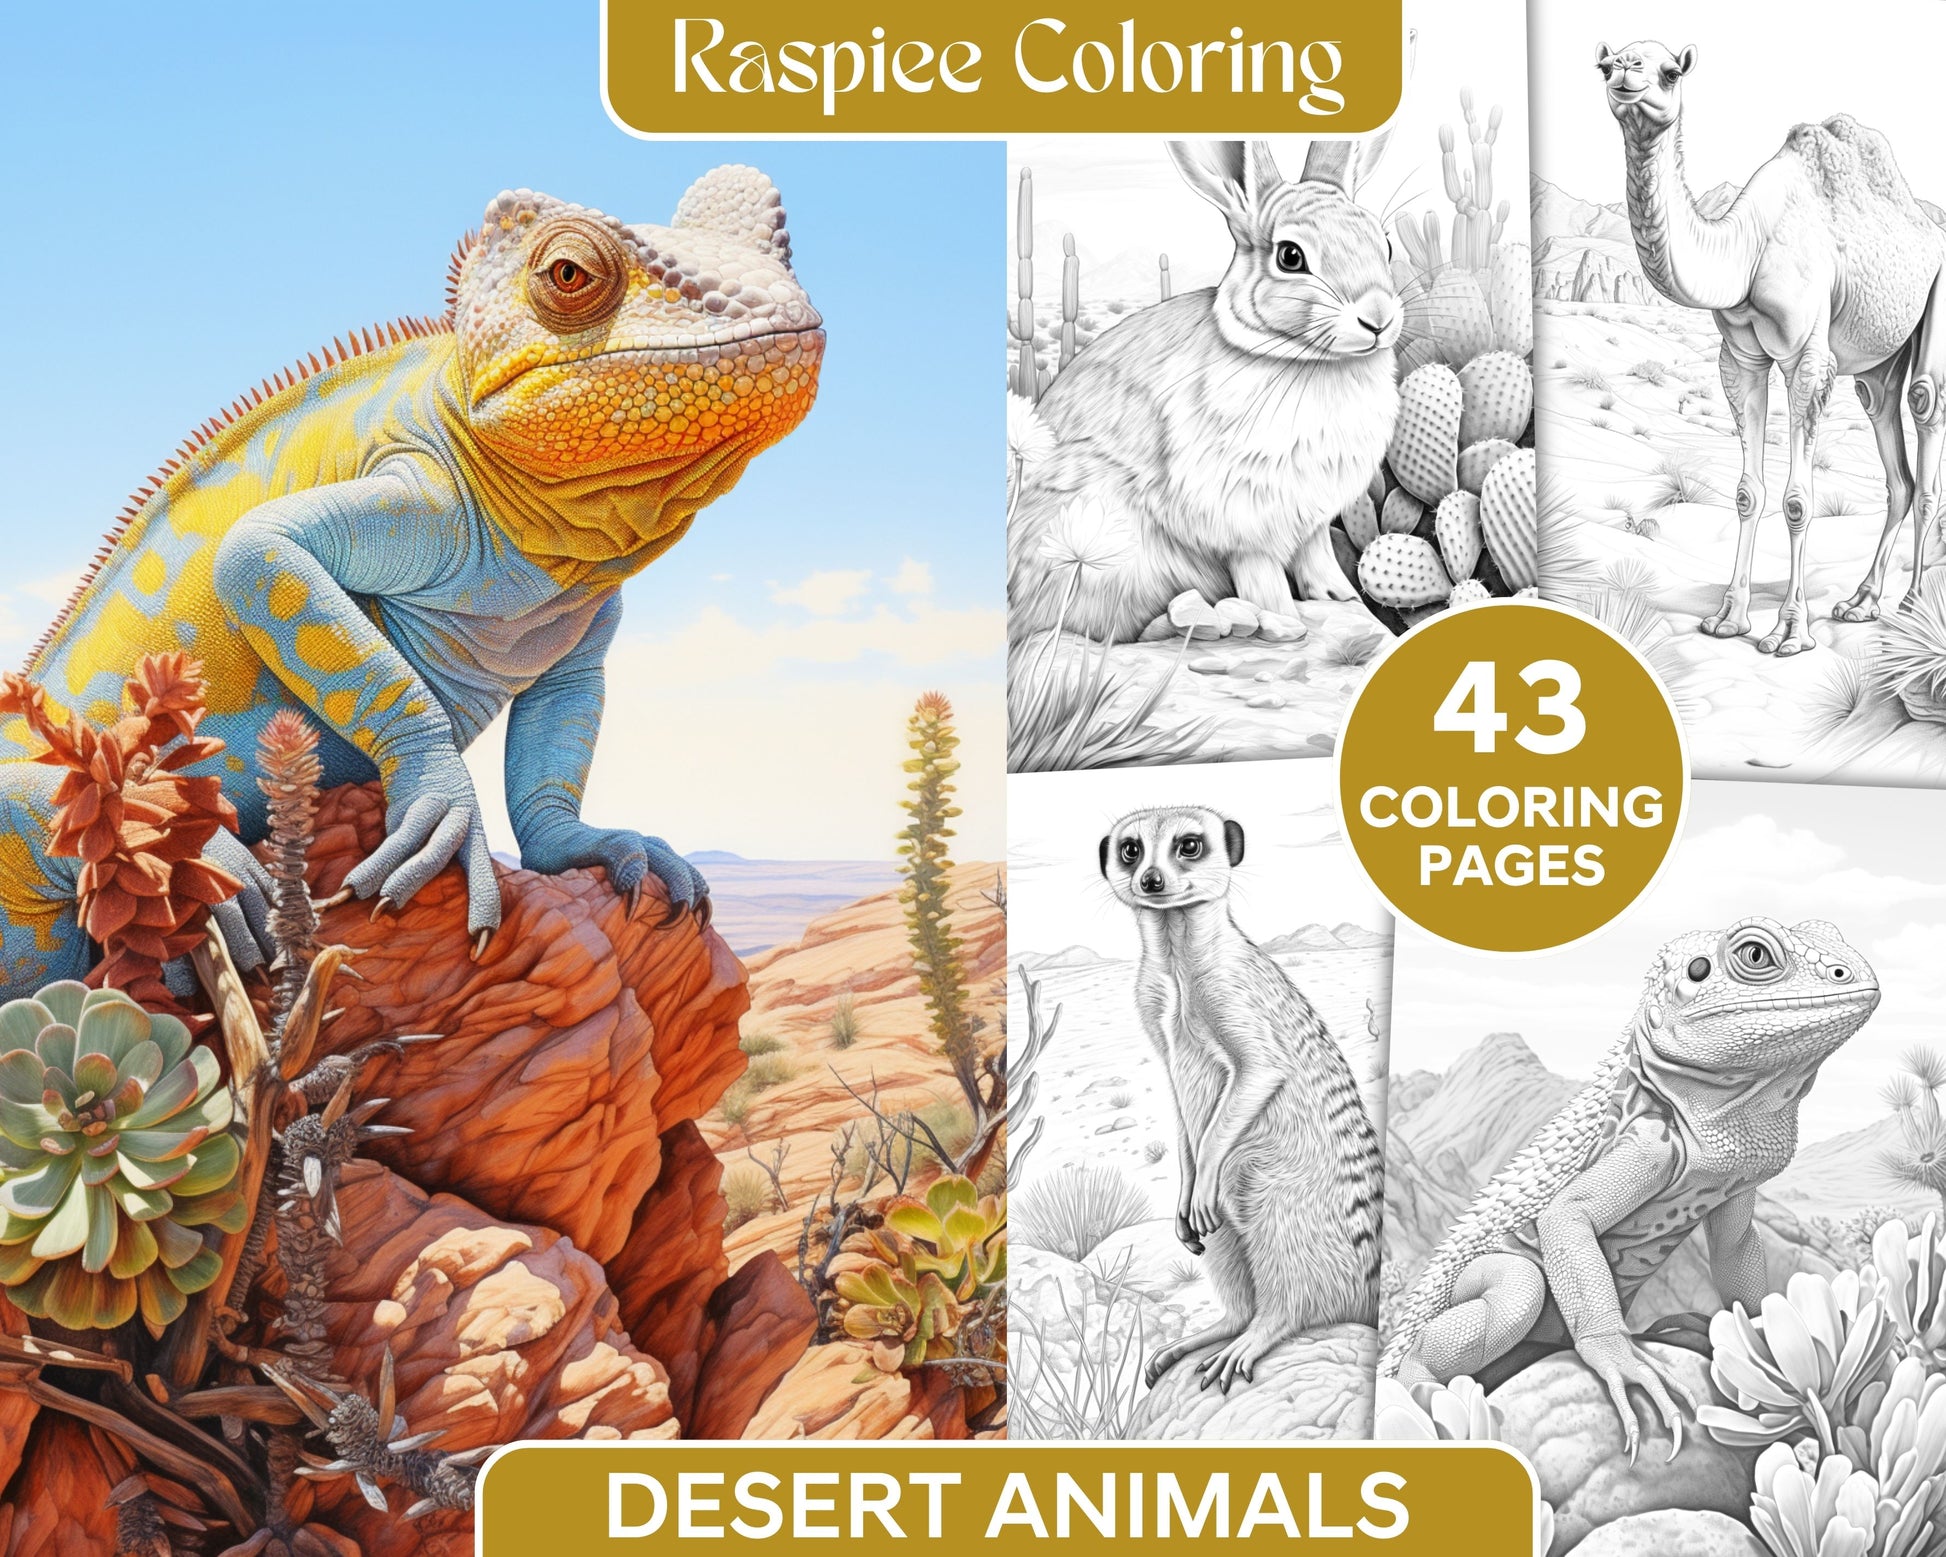 Desert animals grayscale coloring pages printable for adults pdf f â coloring